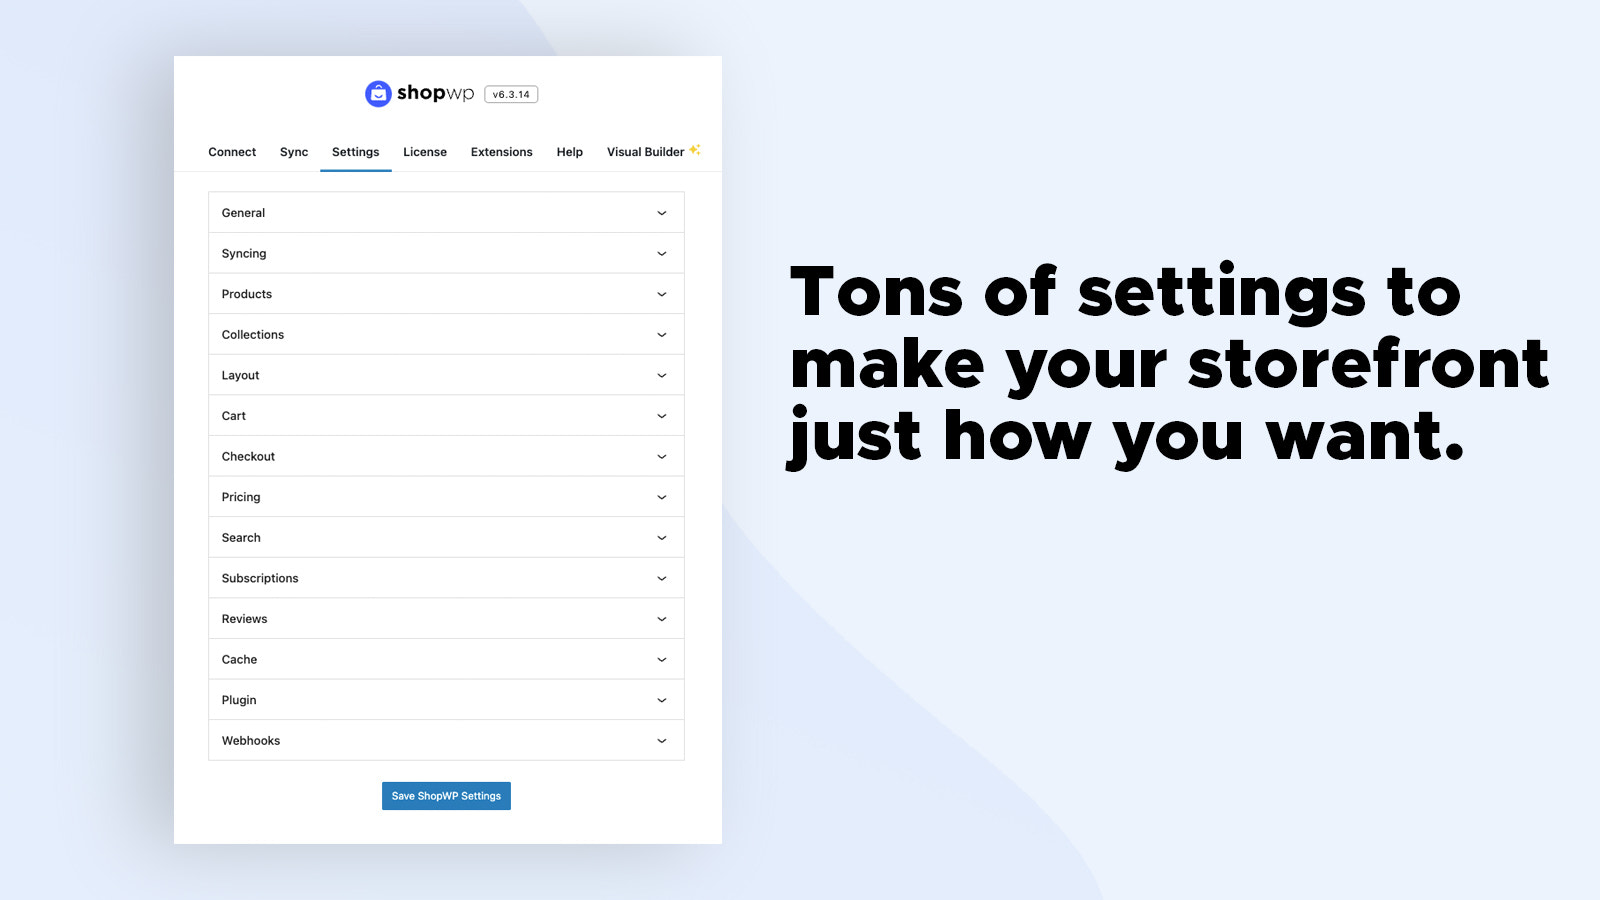 Tons of settings to make your storefront just how you want.